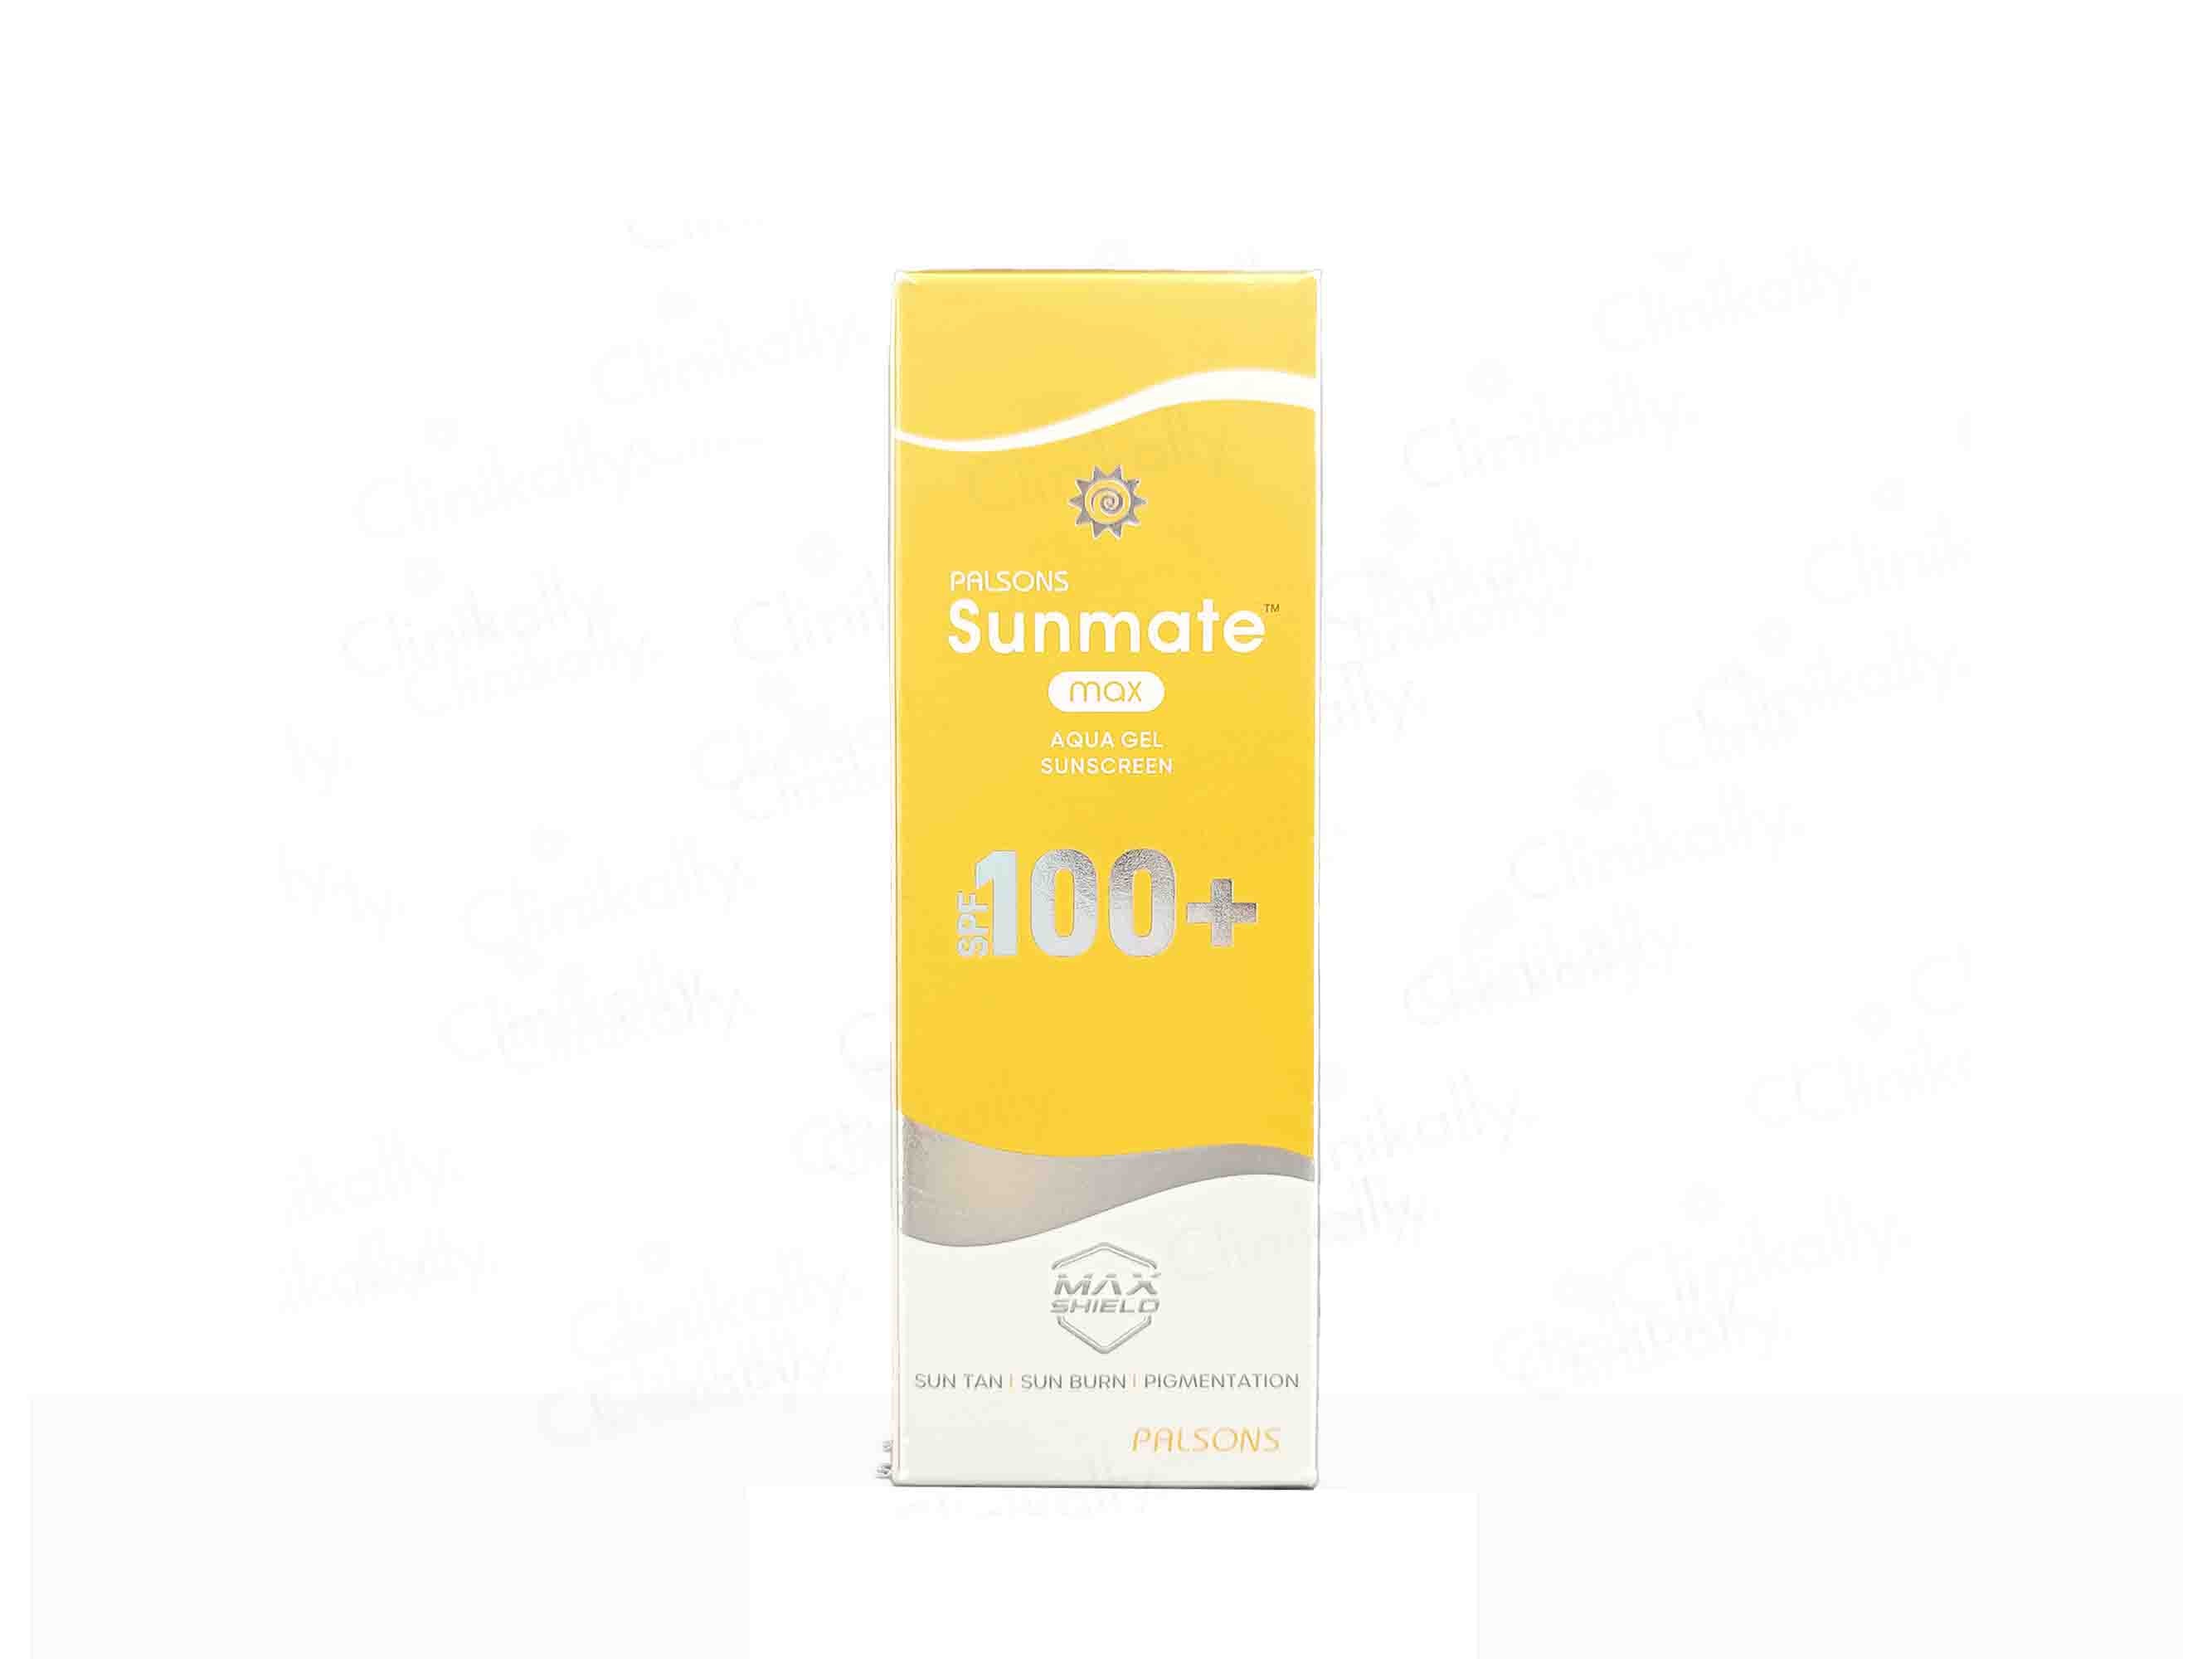 Does Sunscreen With SPF 100 Give You 100% Protection Against the Sun?